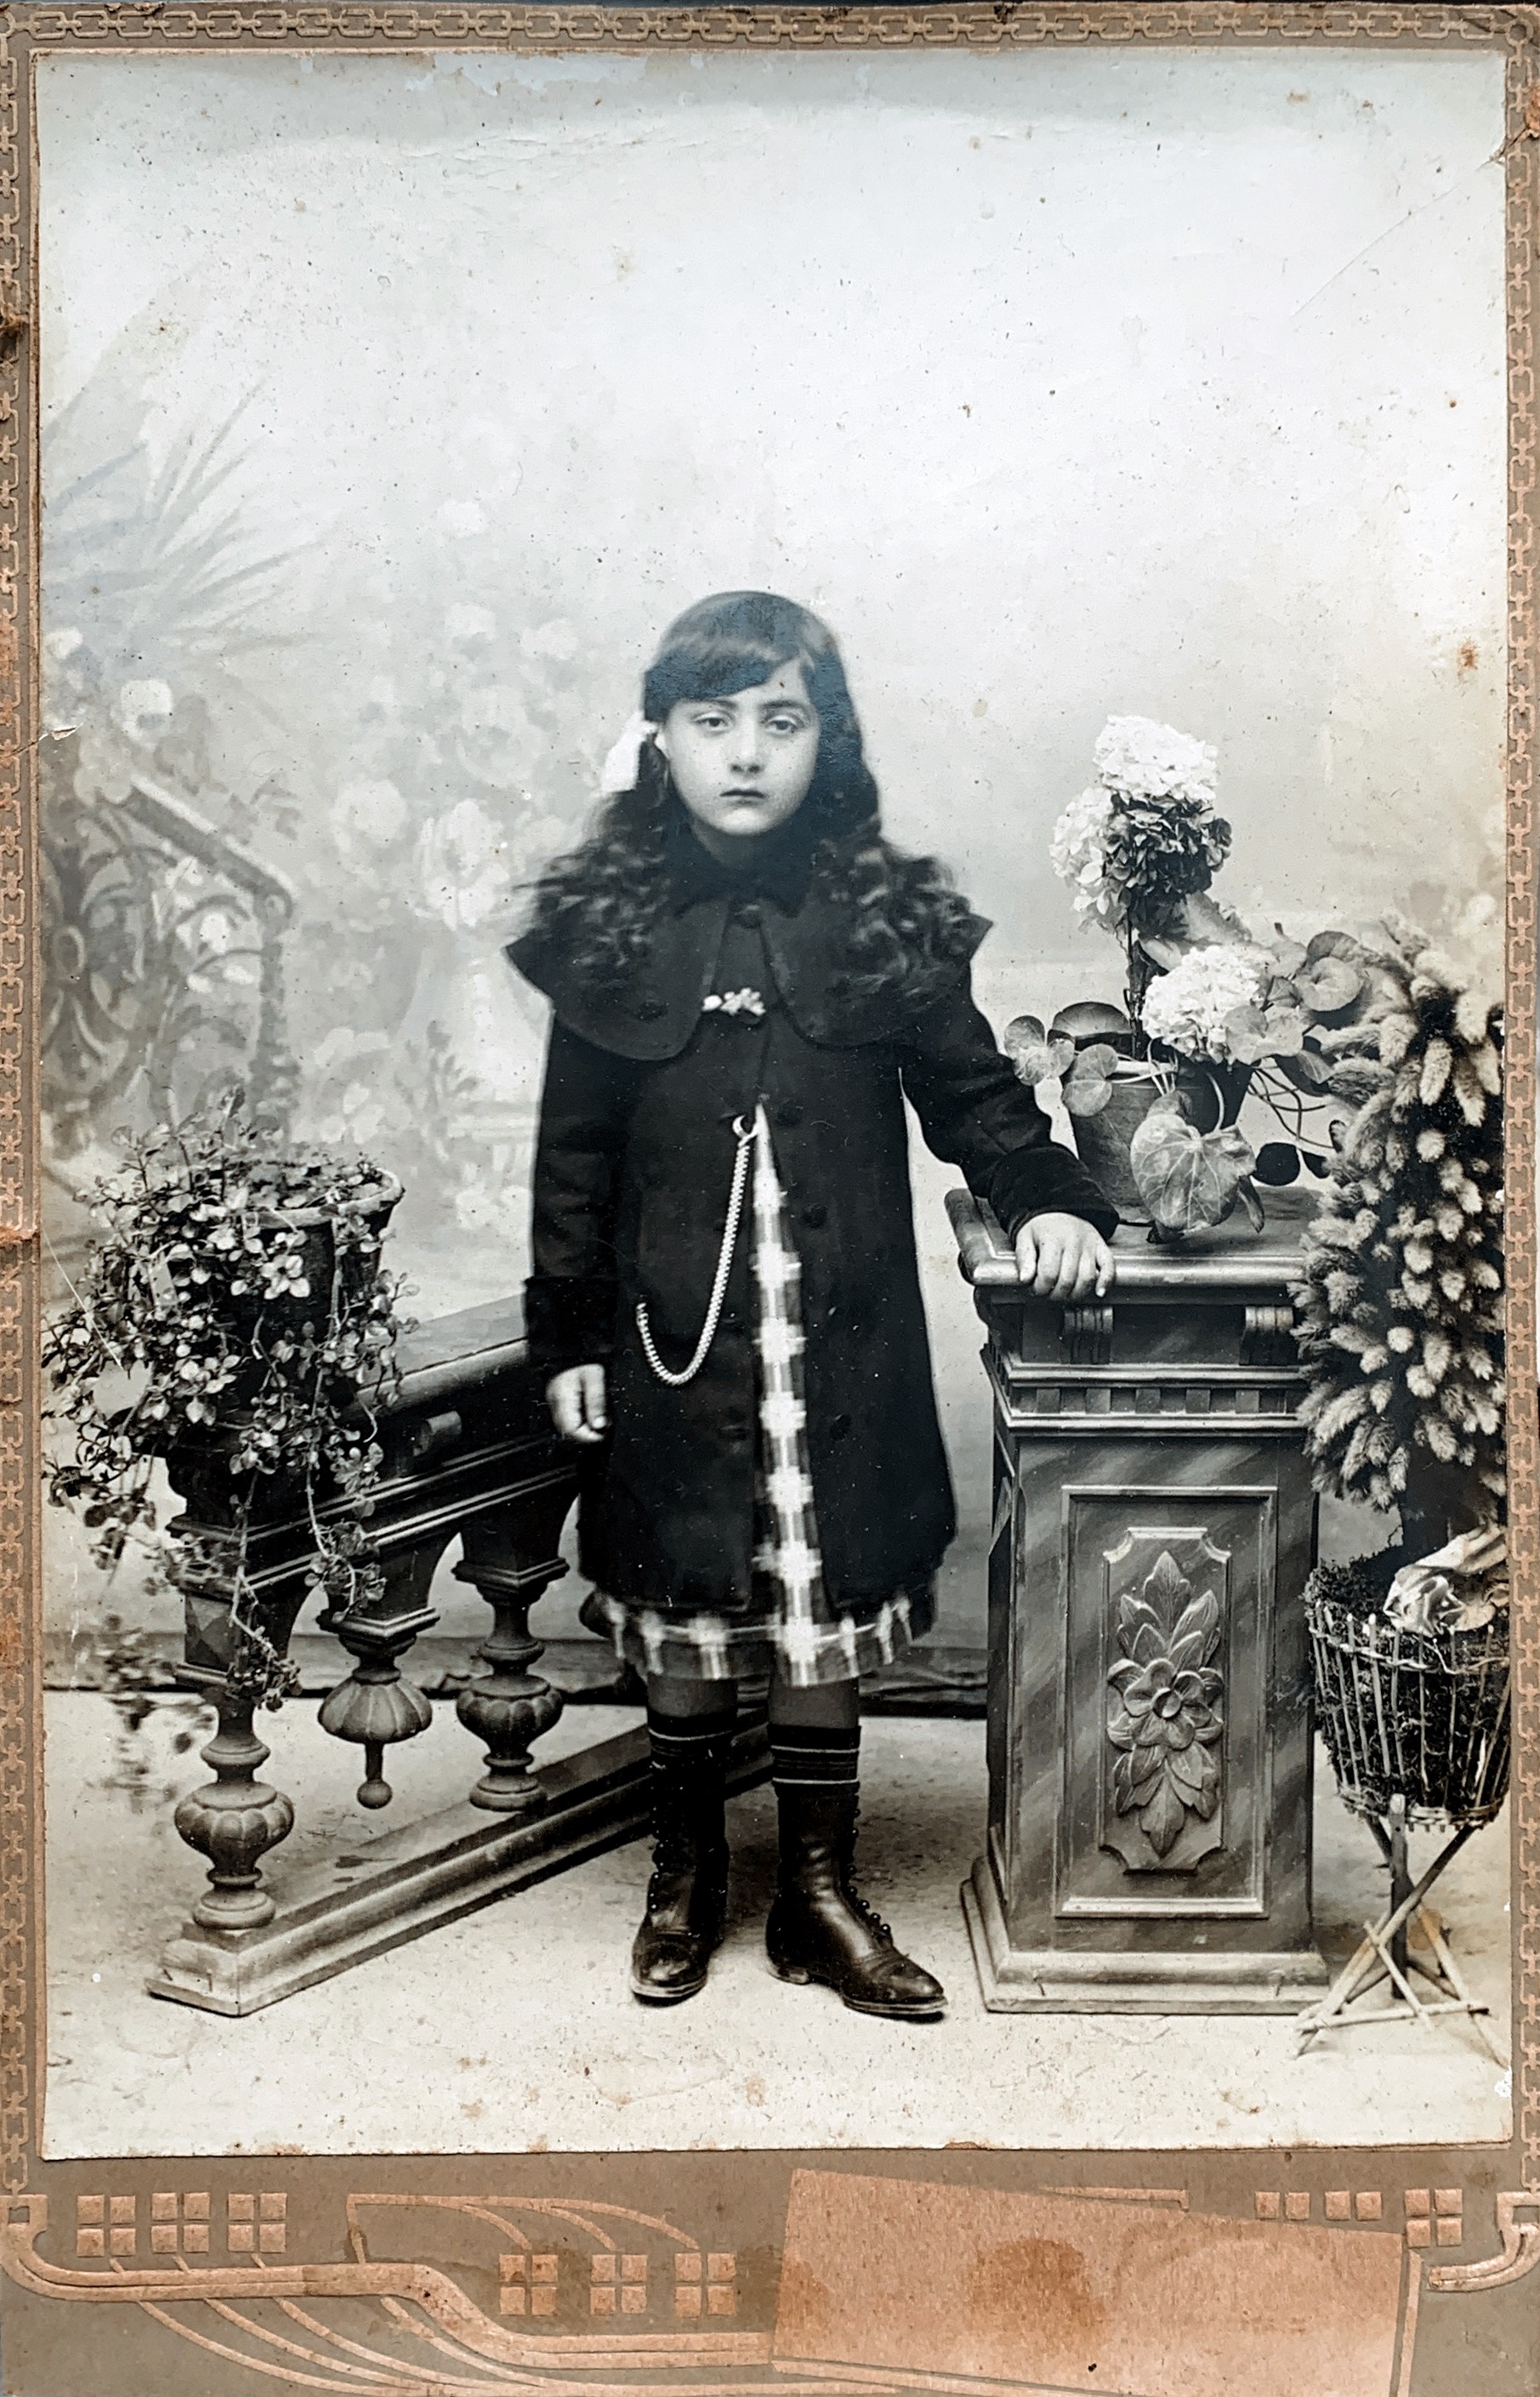 Probably Maria Mousakis in the early 1900s